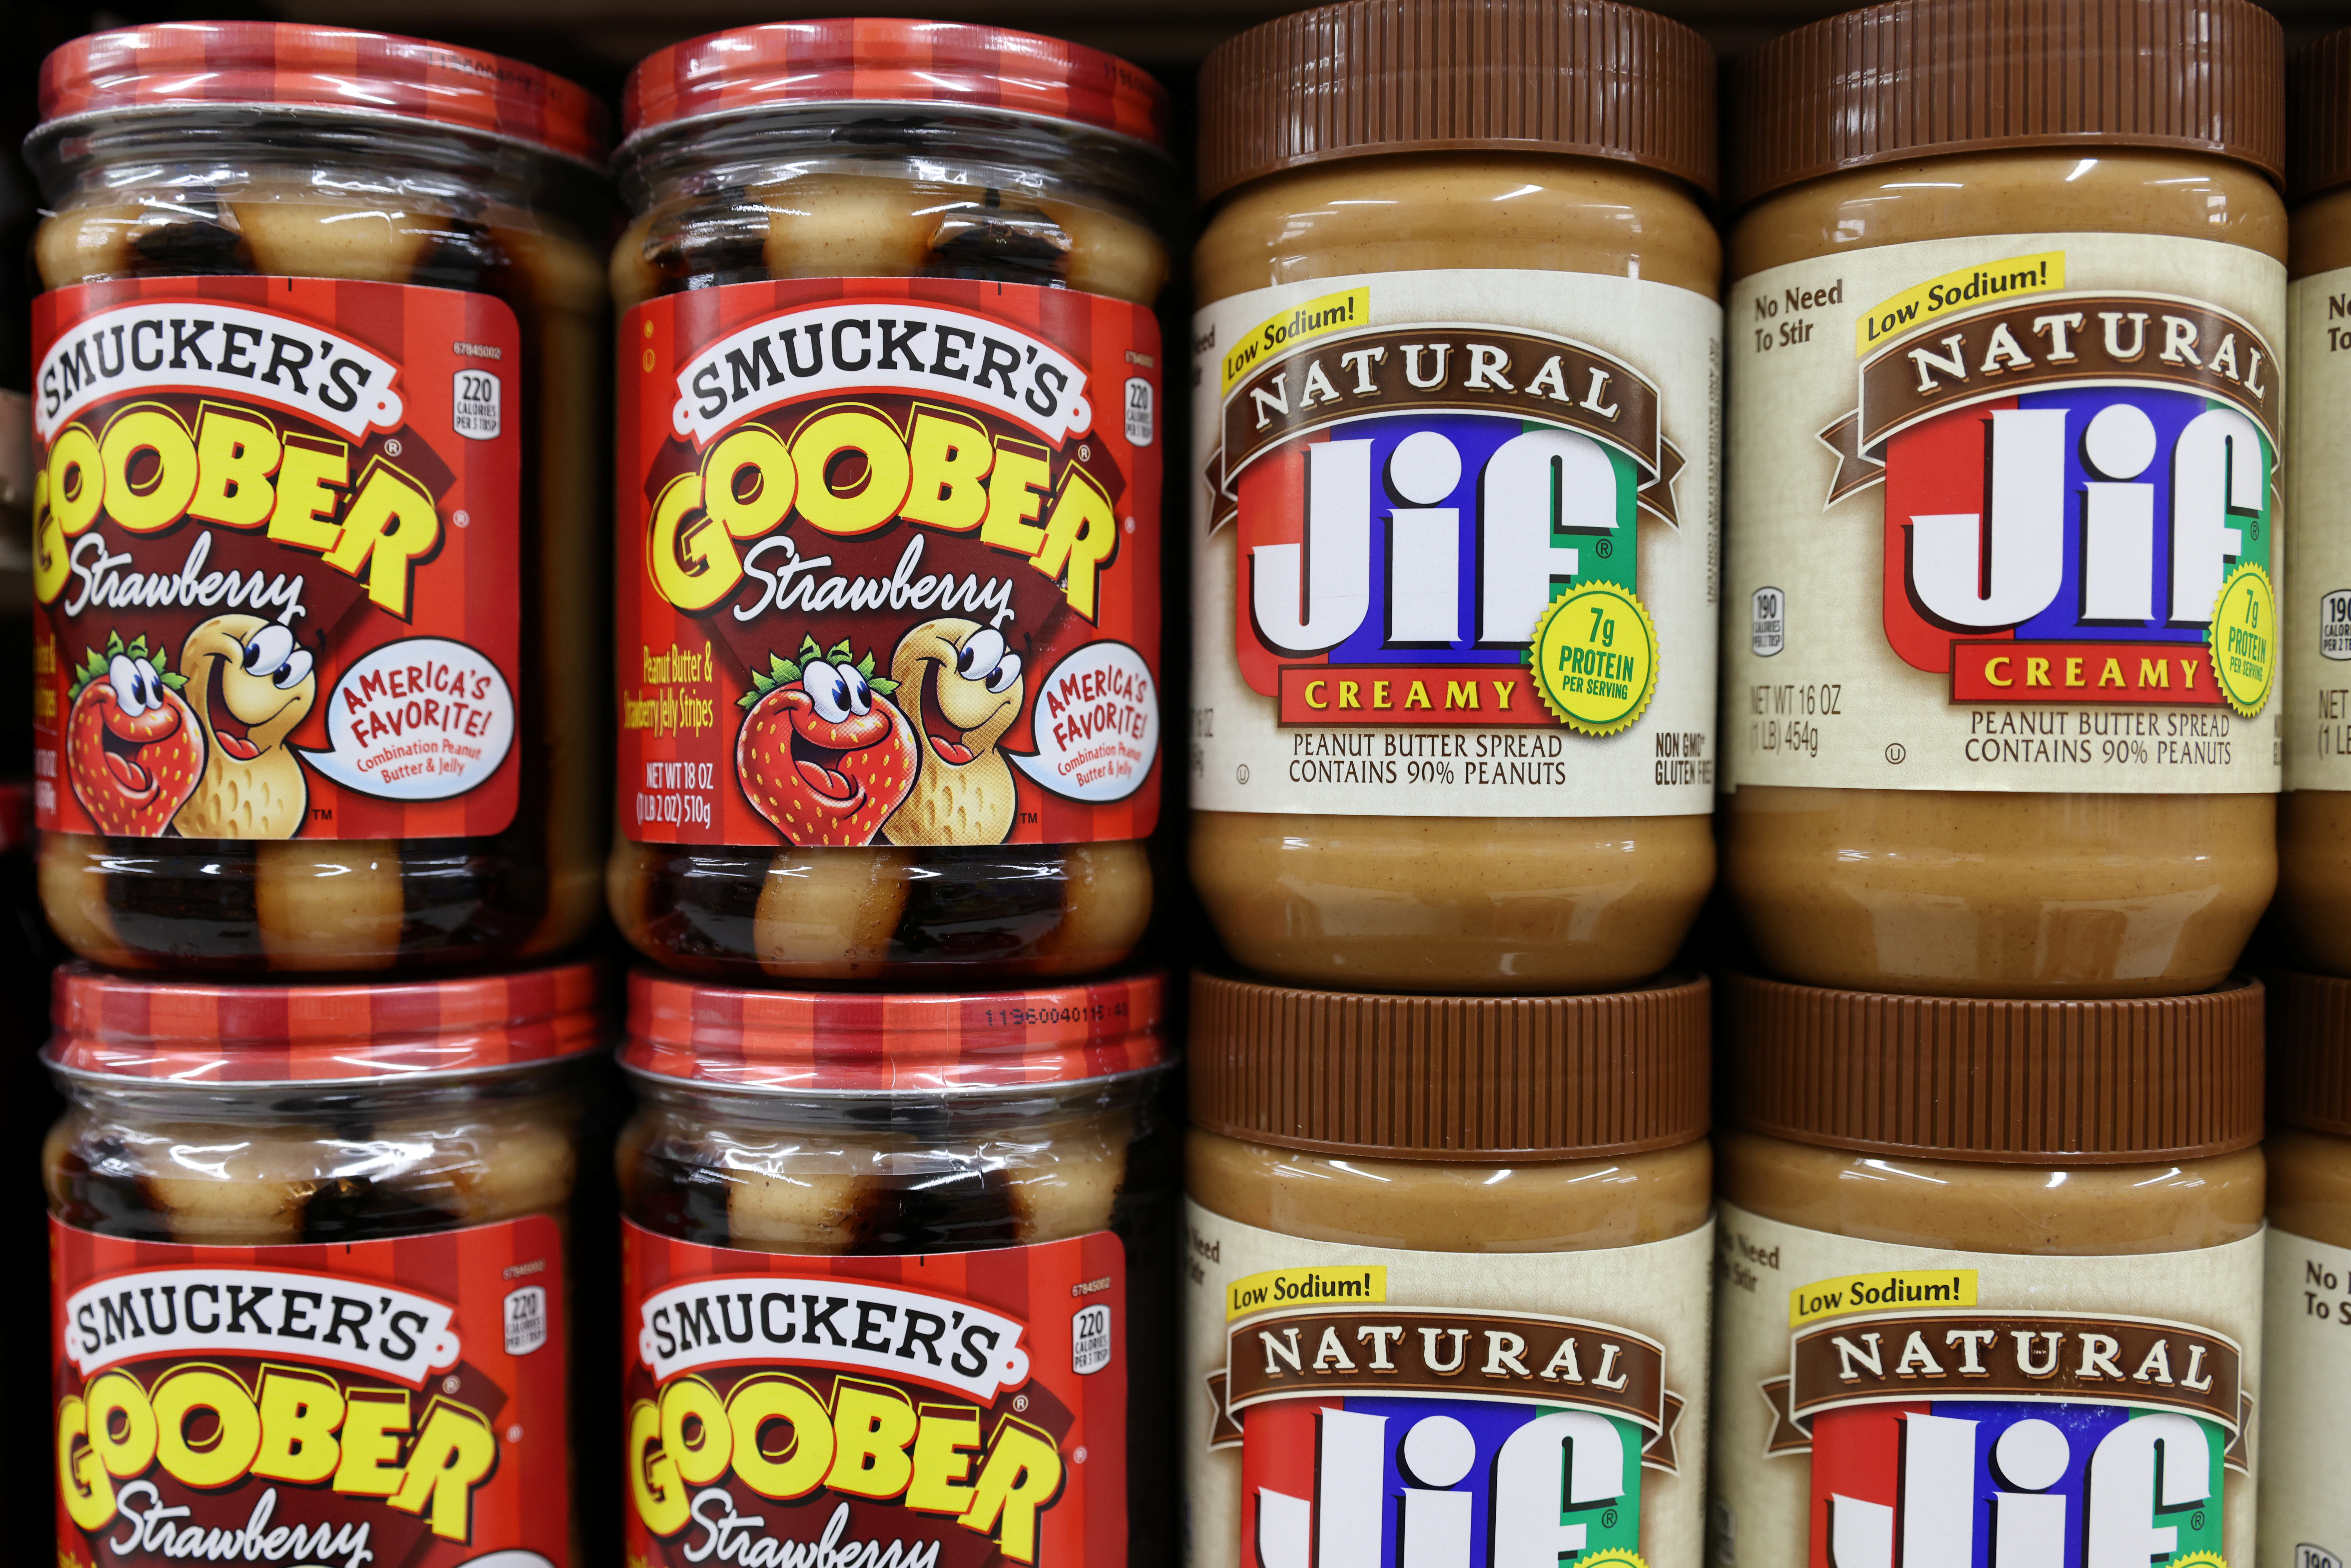 Smucker's Goober Strawberry and Jif peanut butter, brands owned by The J.M. Smucker Company, are seen for sale in a store in Manhattan, New York City